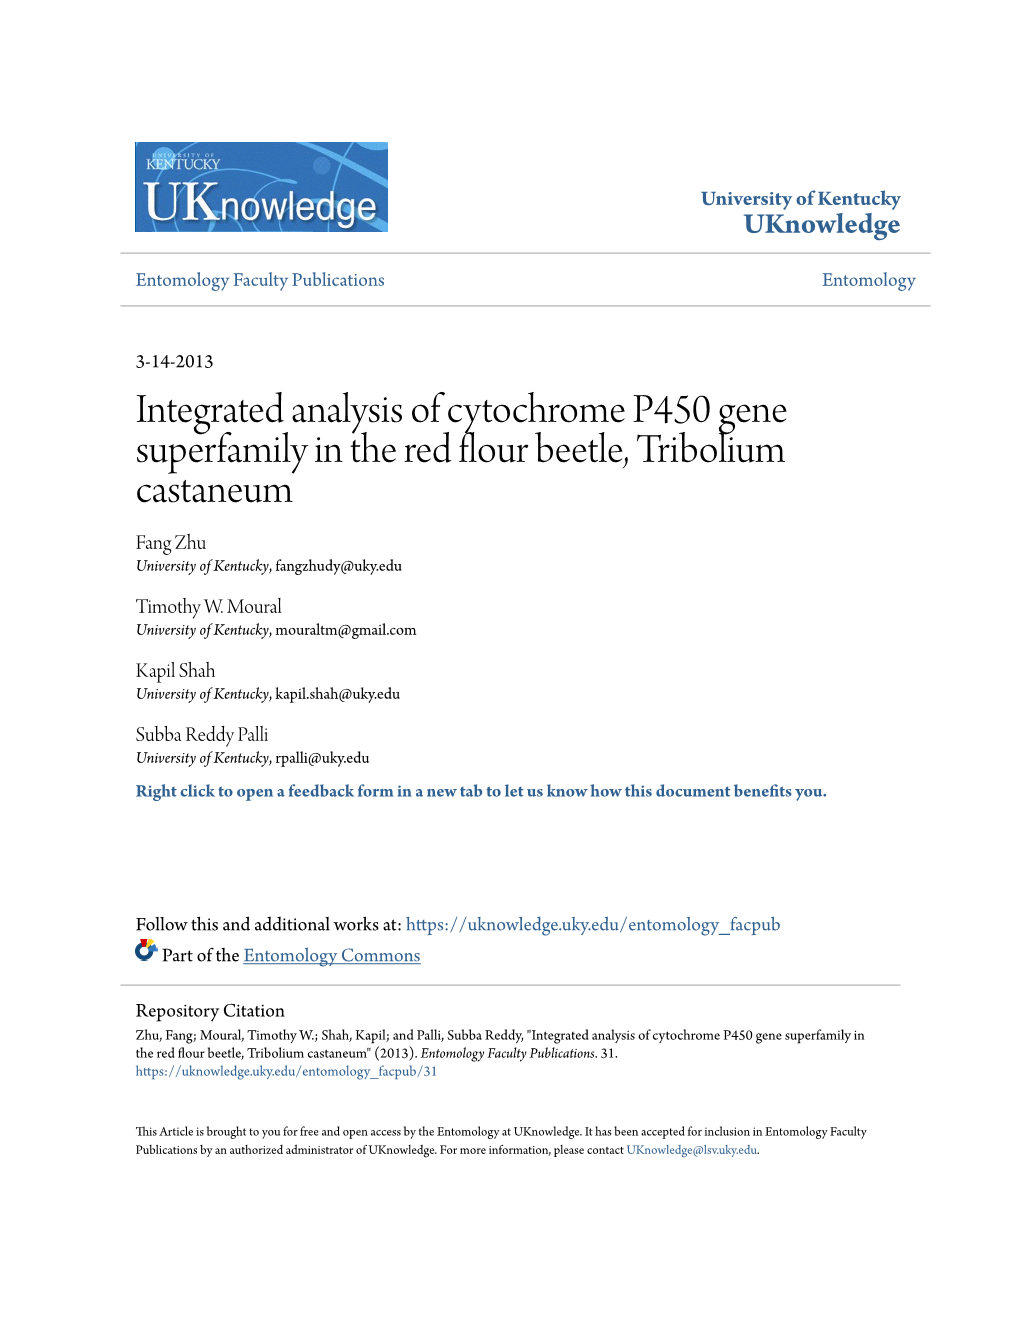 Integrated Analysis of Cytochrome P450 Gene Superfamily in the Red Flour Beetle, Tribolium Castaneum Fang Zhu University of Kentucky, Fangzhudy@Uky.Edu